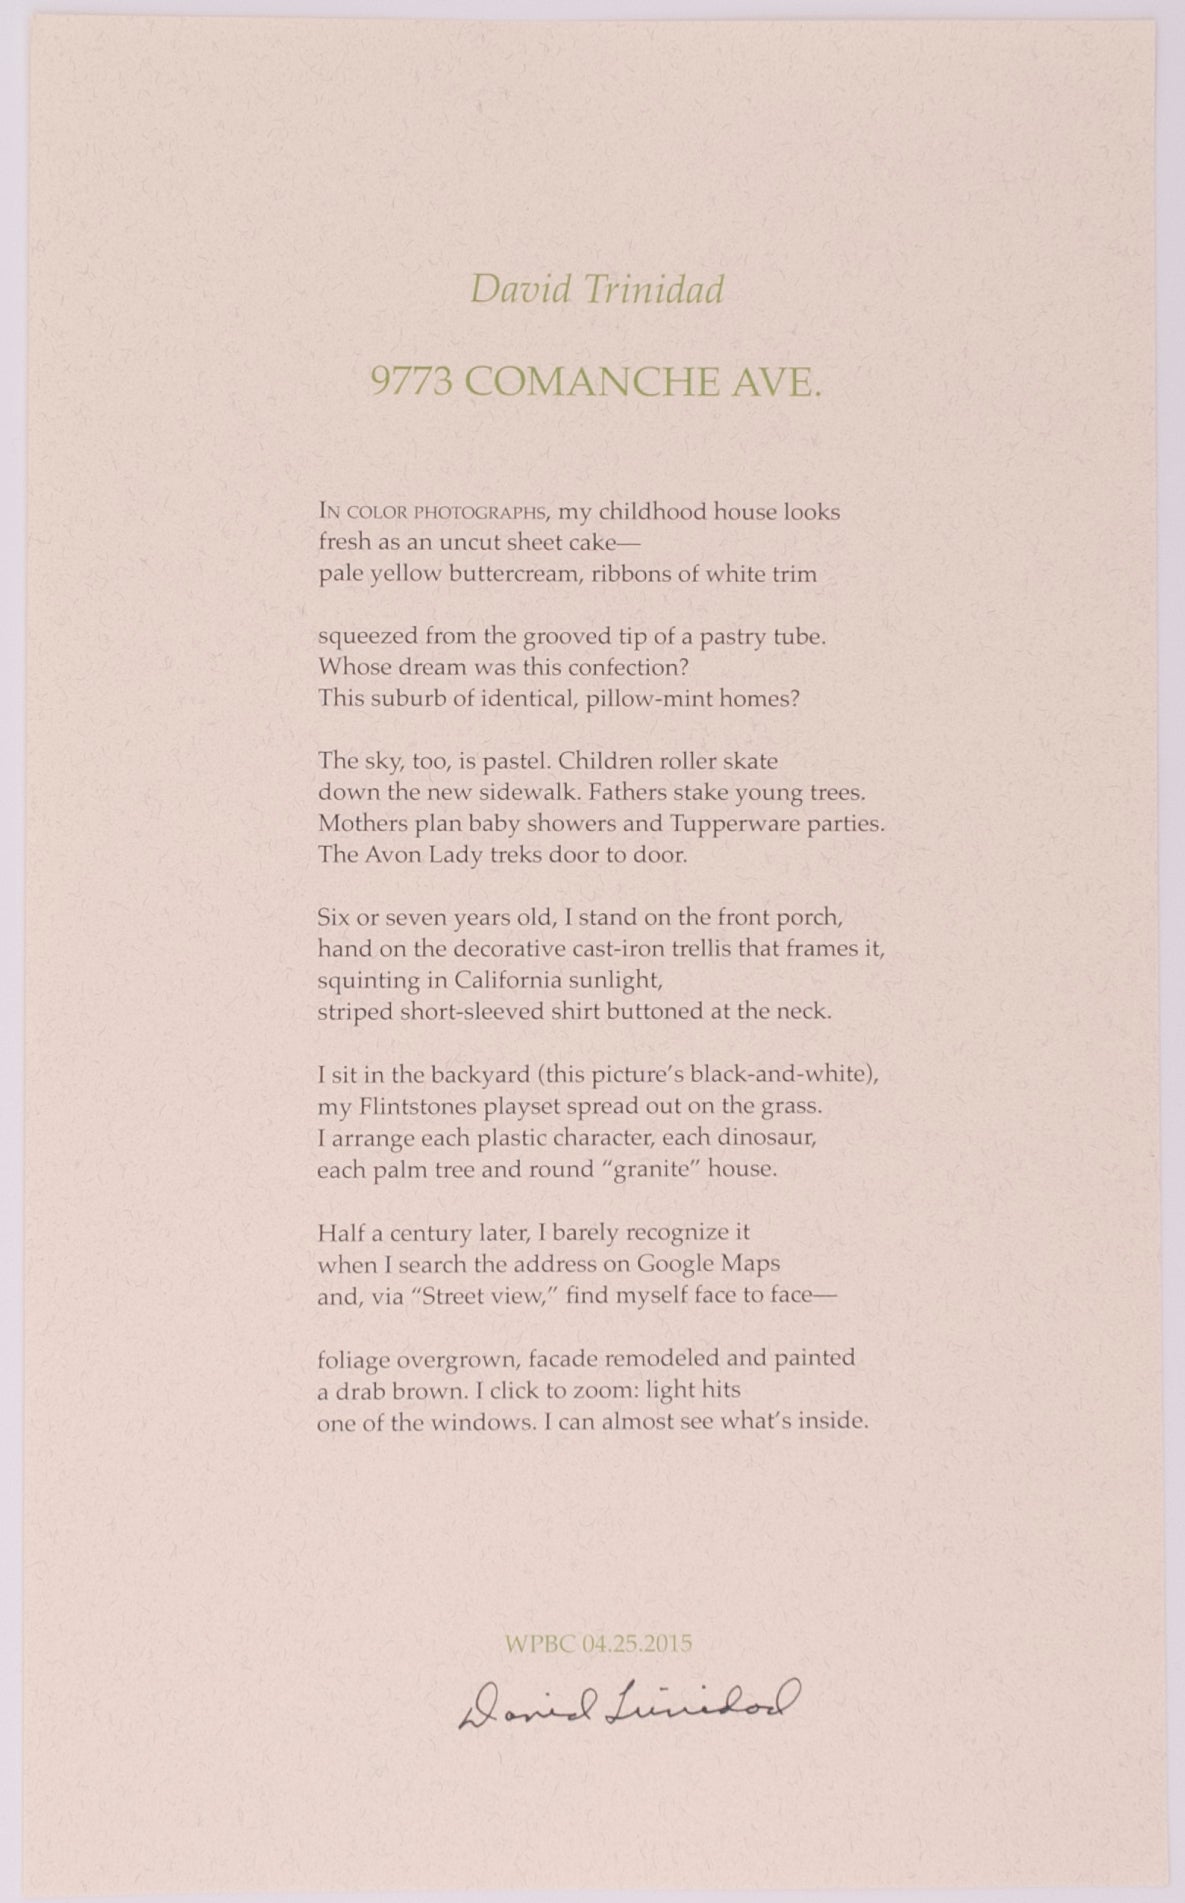 Broadside titled 9773 Comanche Ave. by David Trinidad. Green and black text on tan paper.